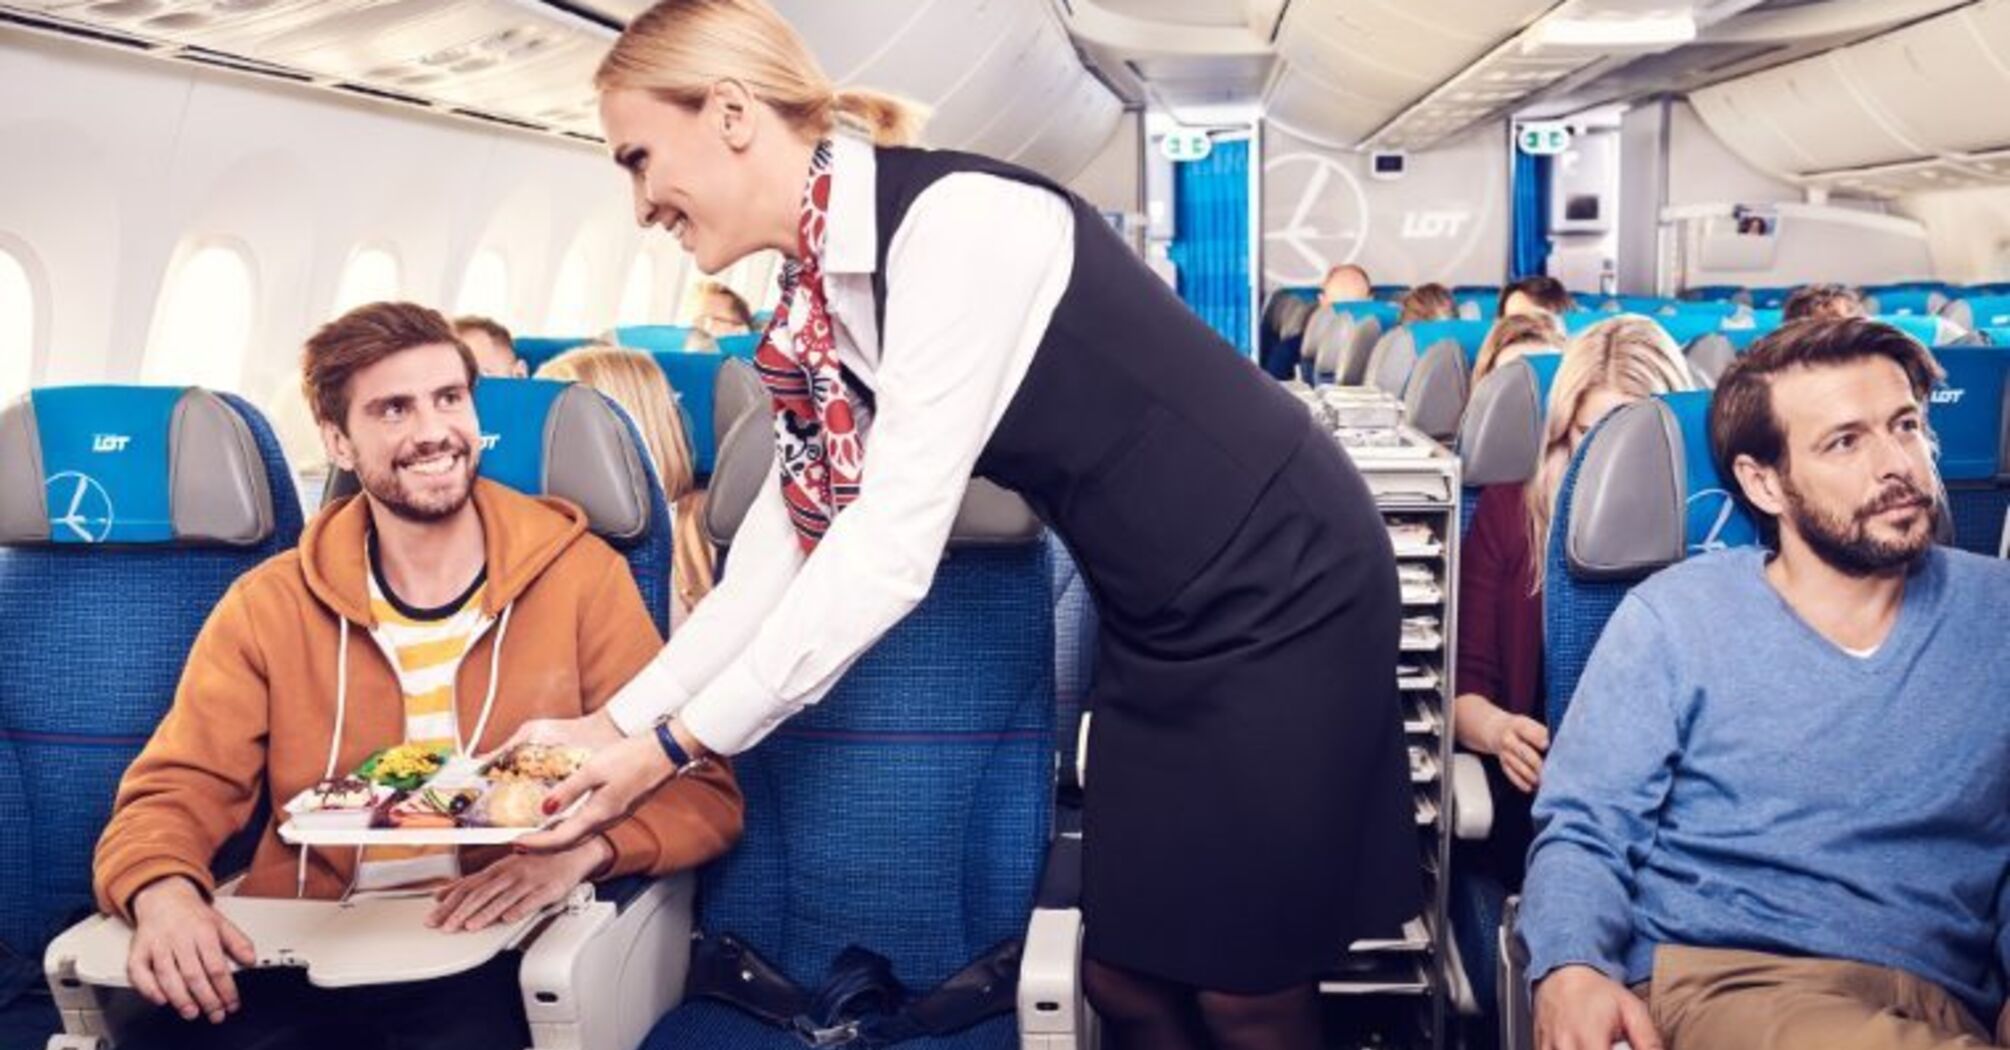 Lobster on a plane: is it possible to get delicious food on board